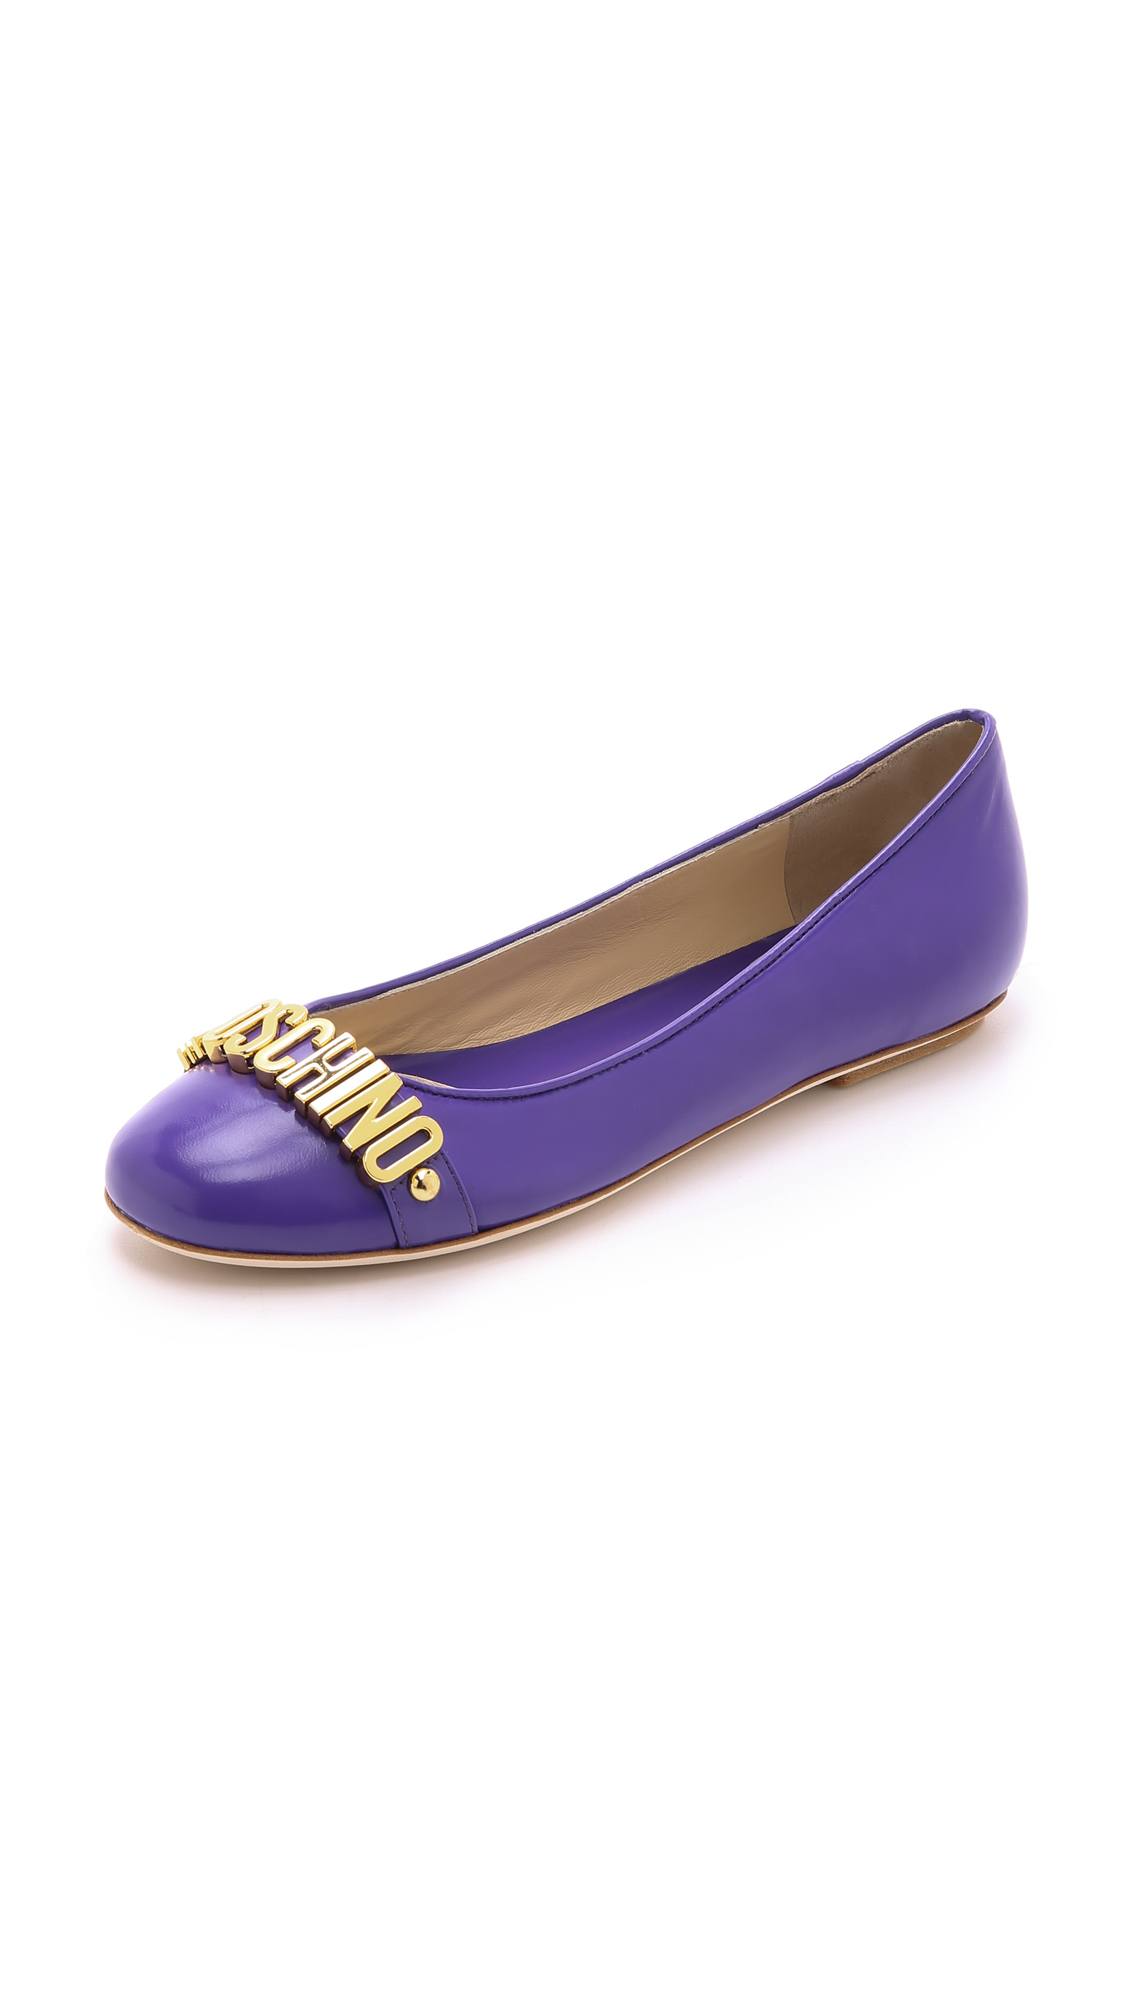 Lyst - Moschino Flats - Violet in Purple